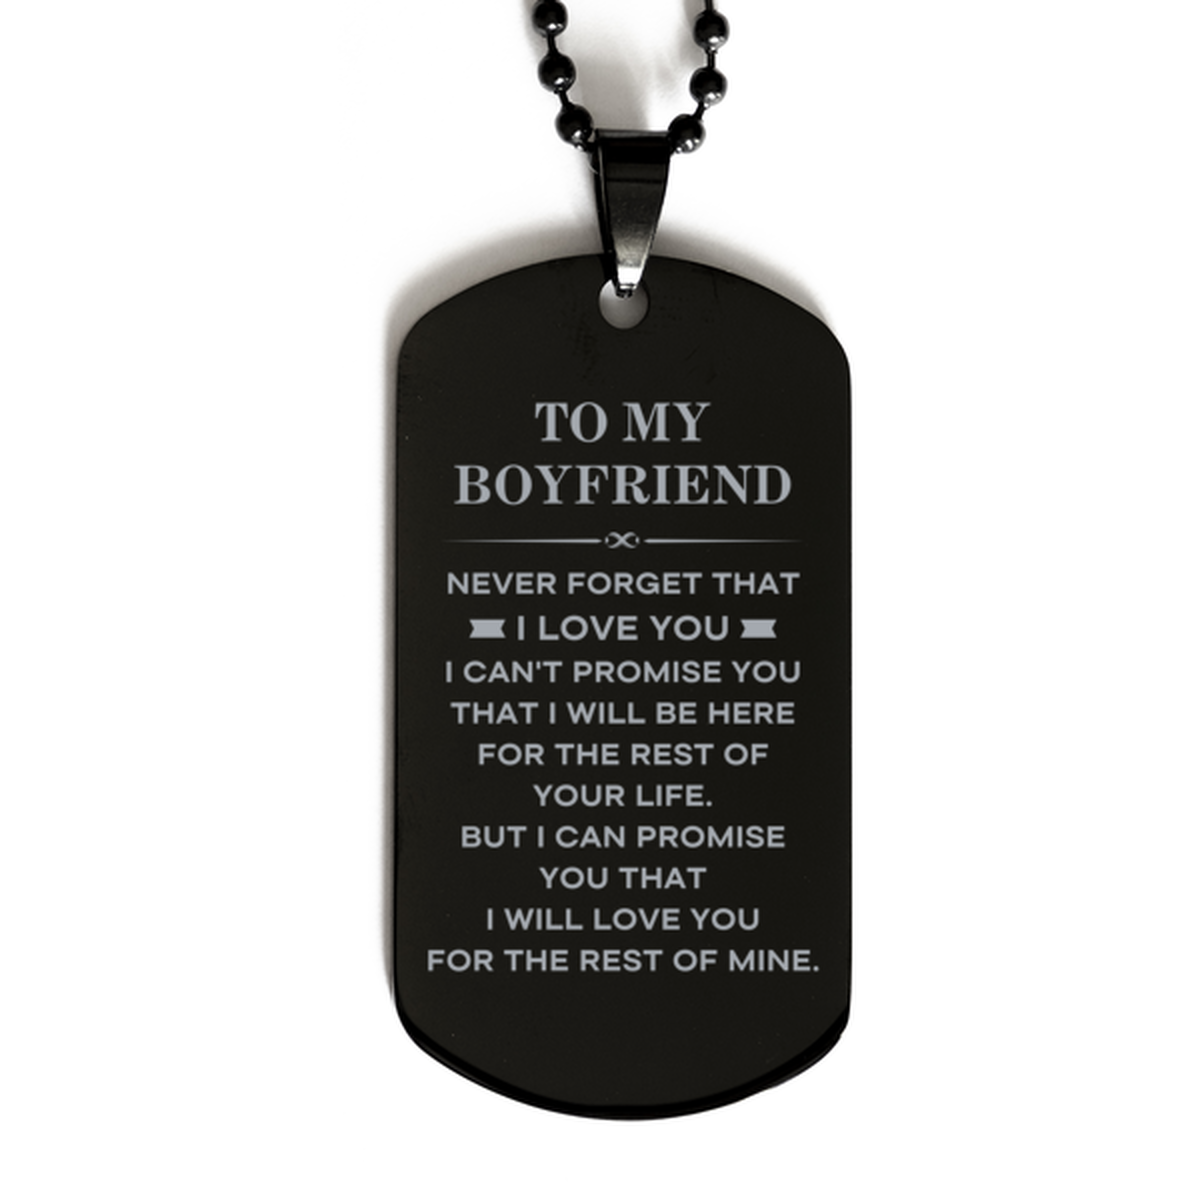 To My Boyfriend Gifts, I will love you for the rest of mine, Love Boyfriend Dog Tag Necklace, Birthday Christmas Unique Black Dog Tag For Boyfriend